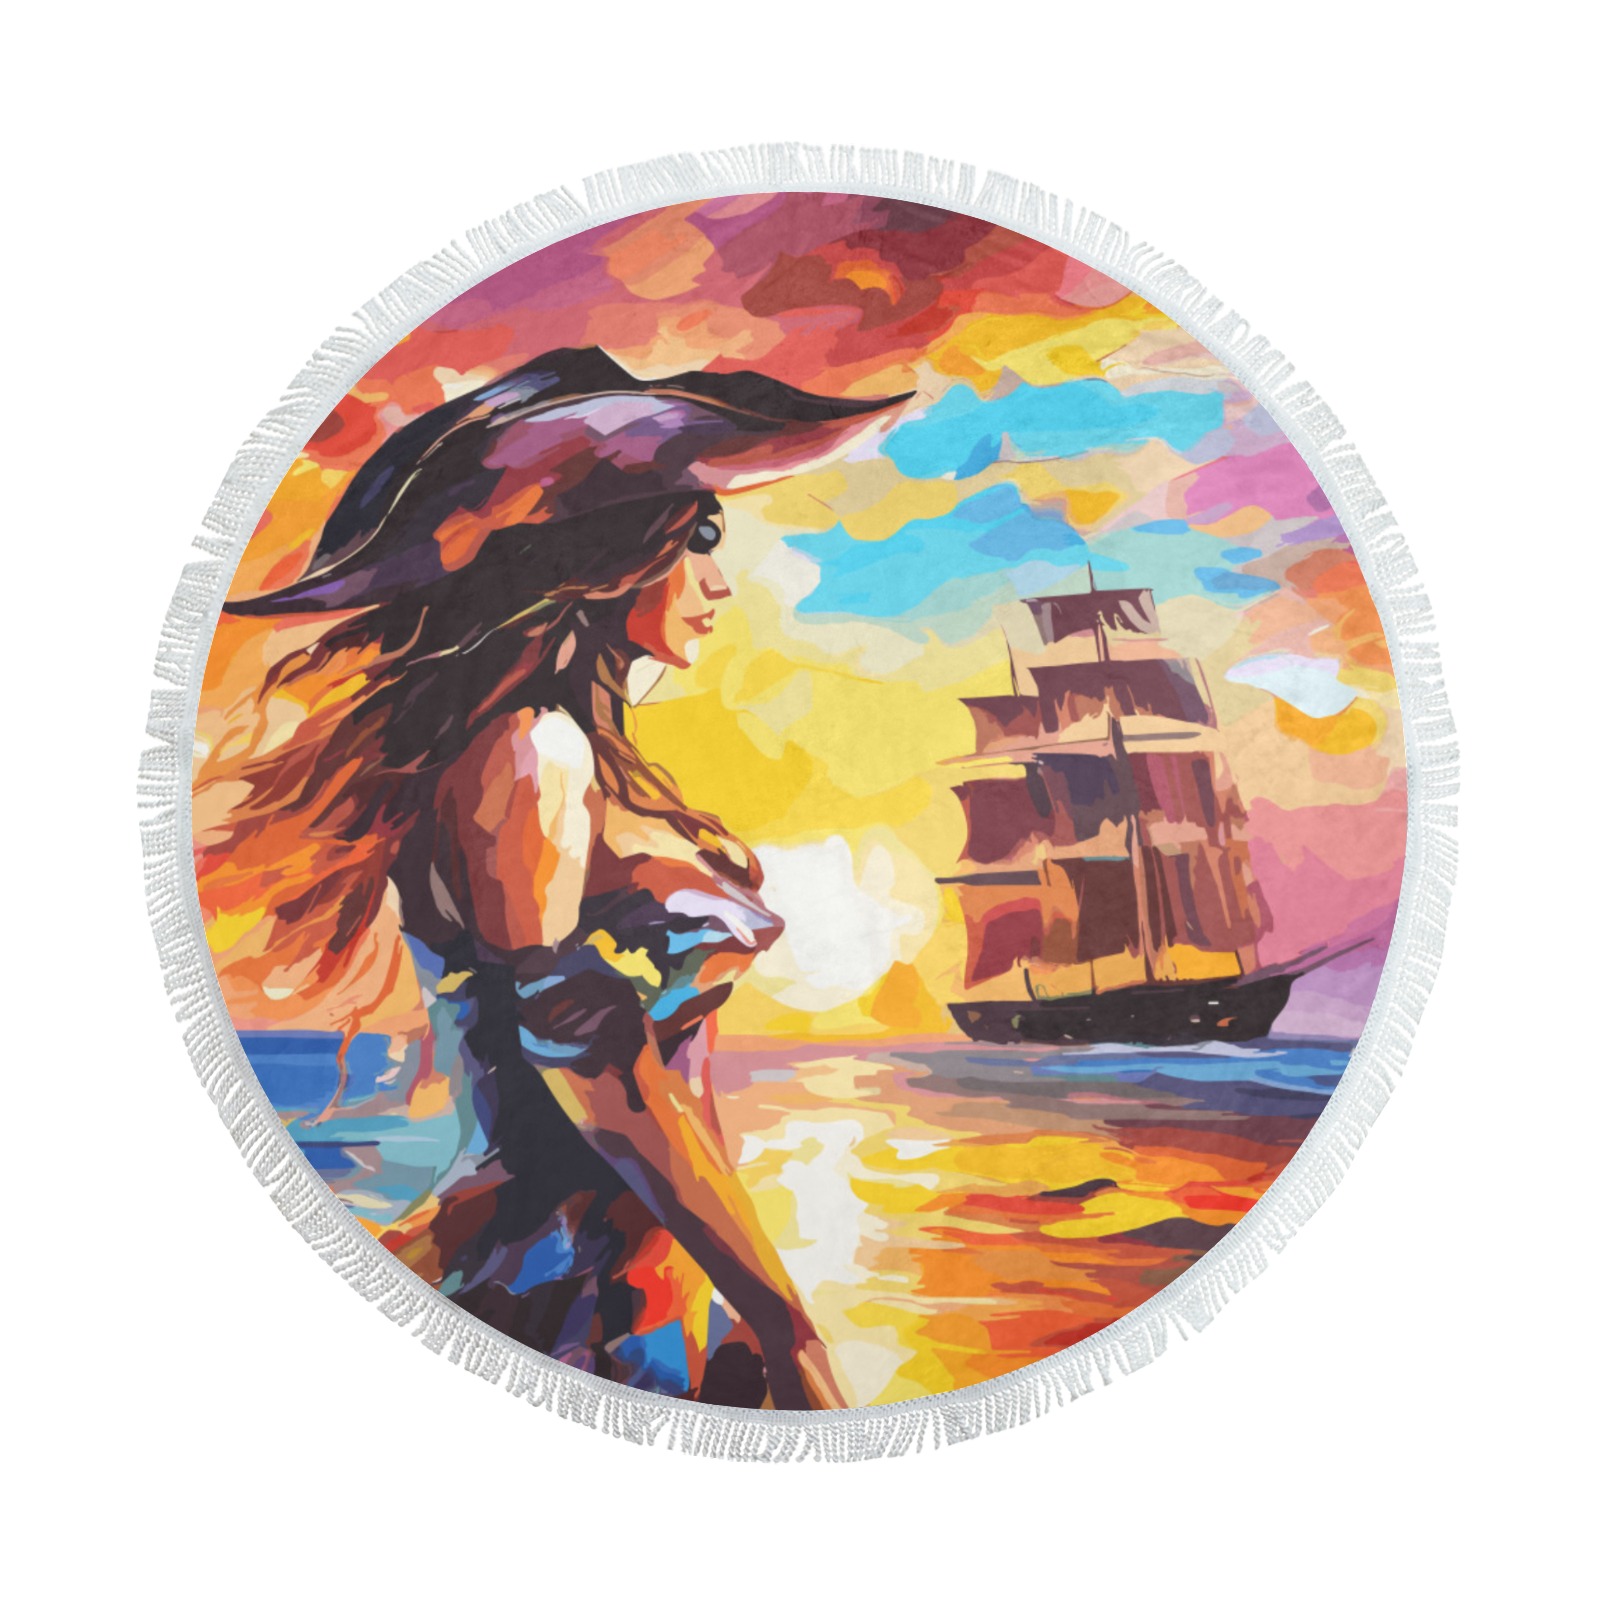 Cool pirate lady waits for her captain by the sea. Circular Beach Shawl Towel 59"x 59"